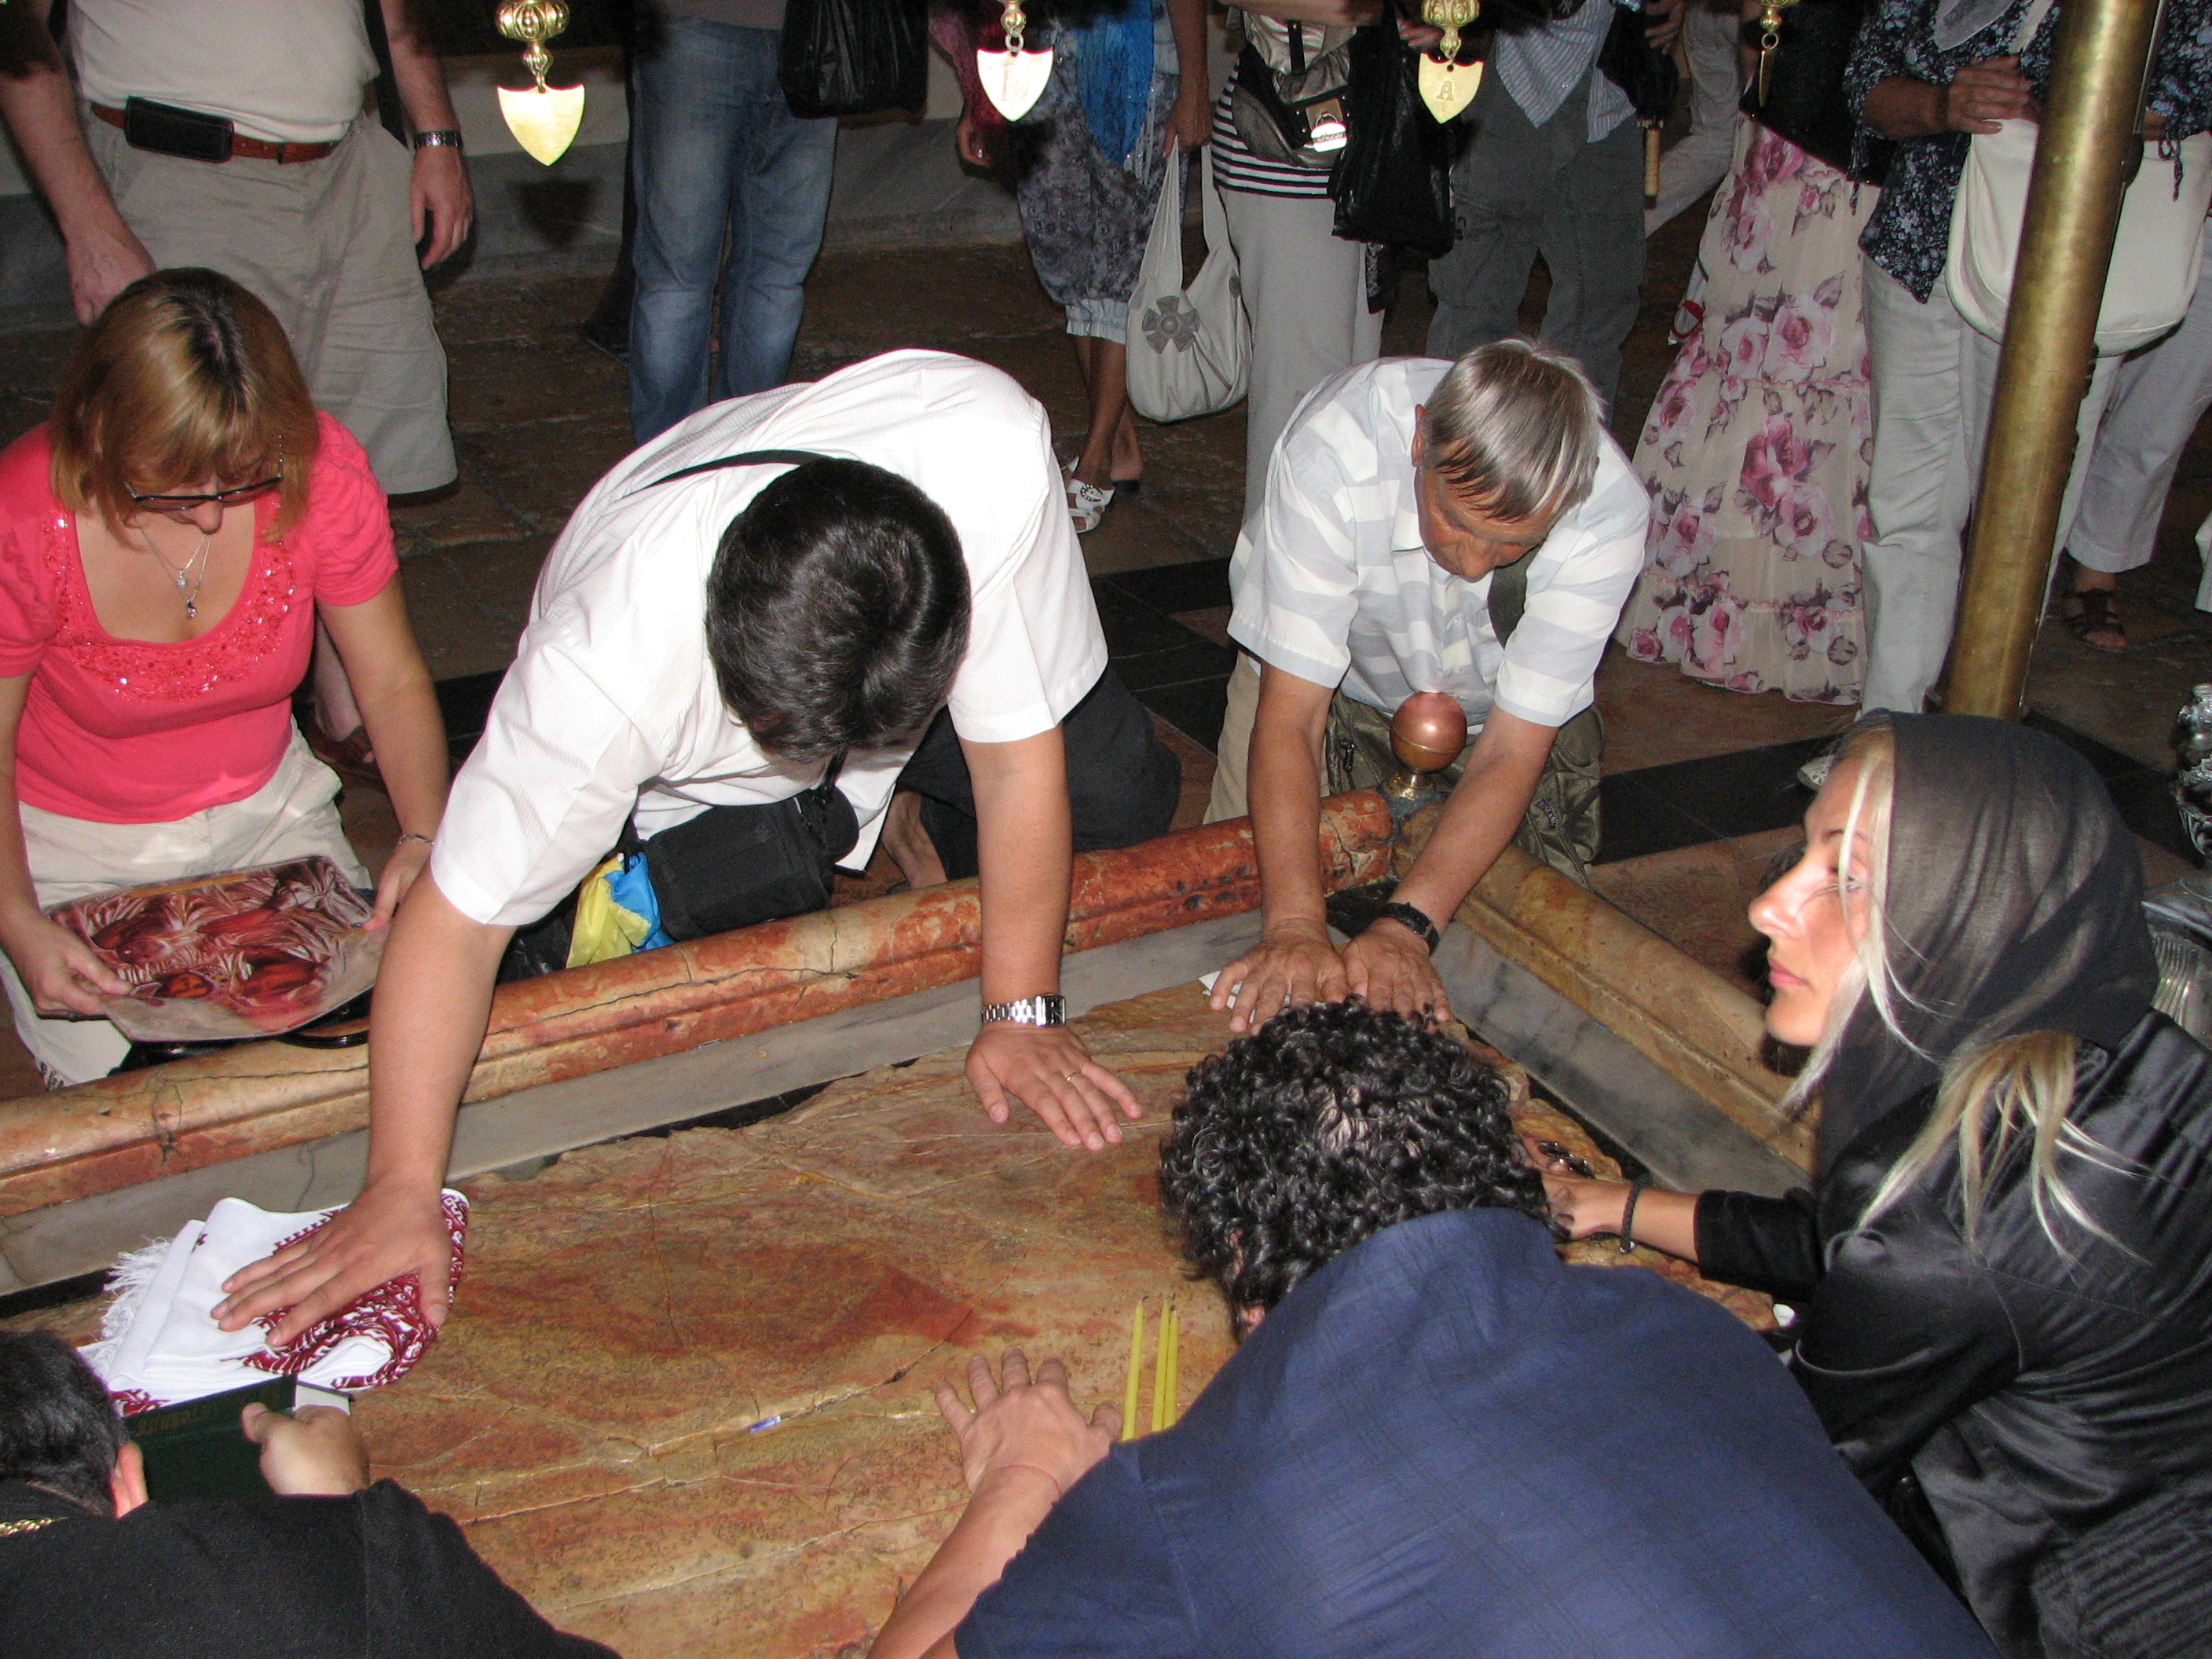 The Stone of Anointing in the Church of the Holy Sepulchre, Jerusalem, Israel